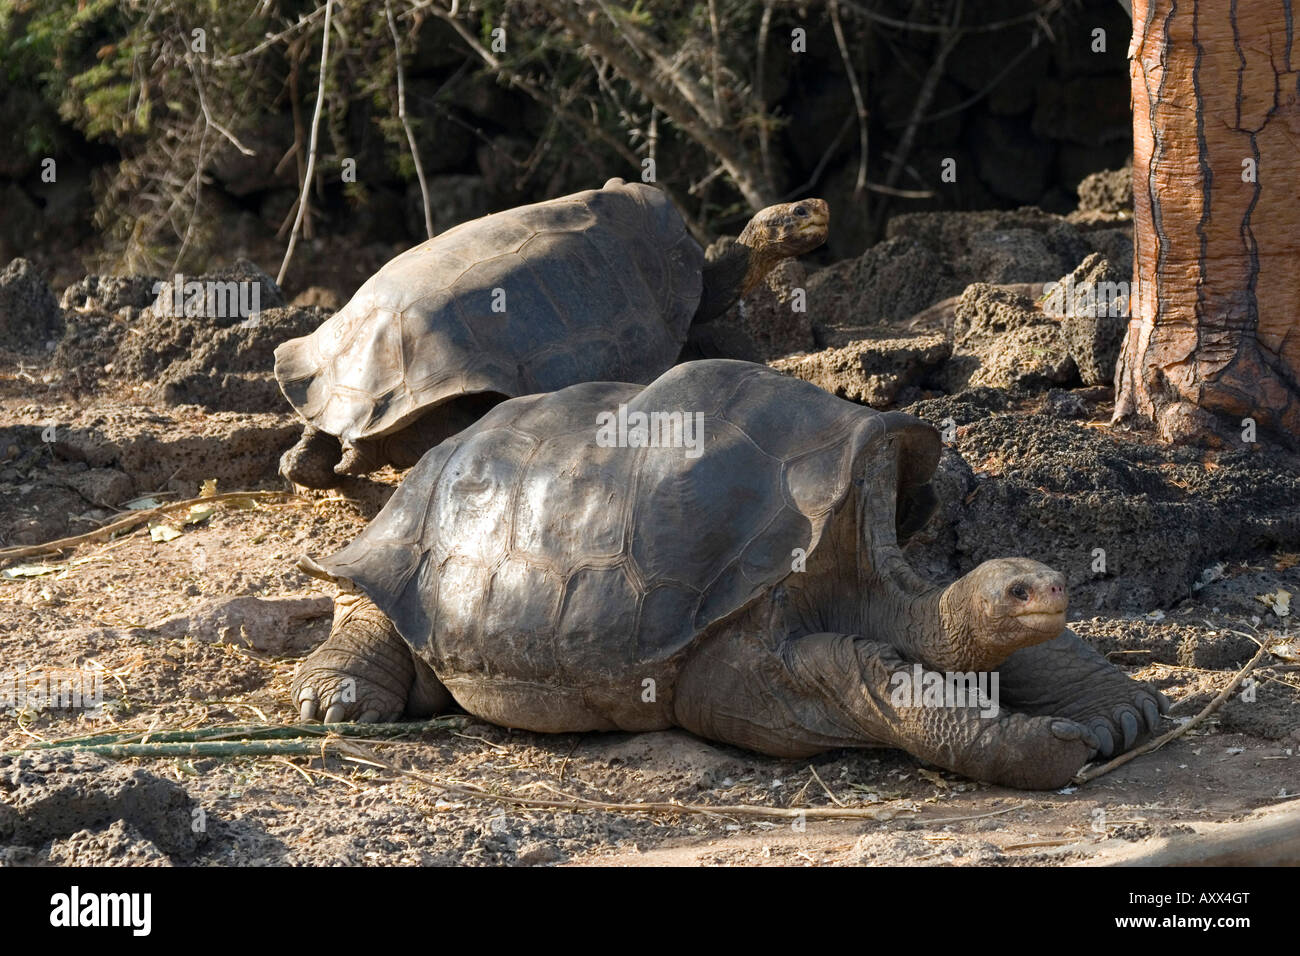 Lonesome George The only one from his race of Galapagos Island,isle pinta, tortoise Stock Photo